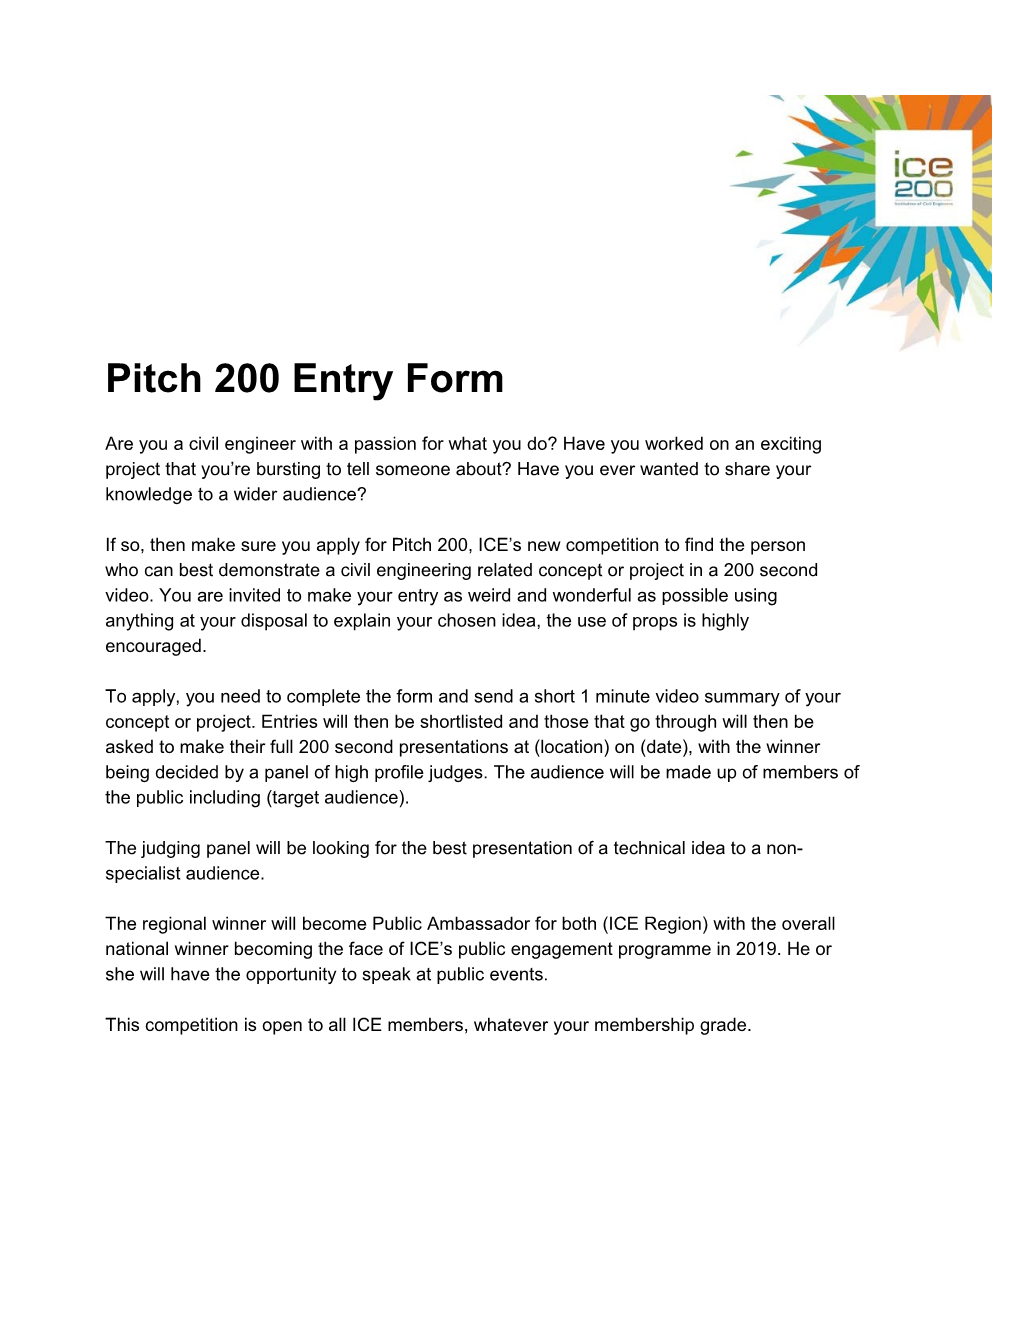 Pitch 200 Entry Form